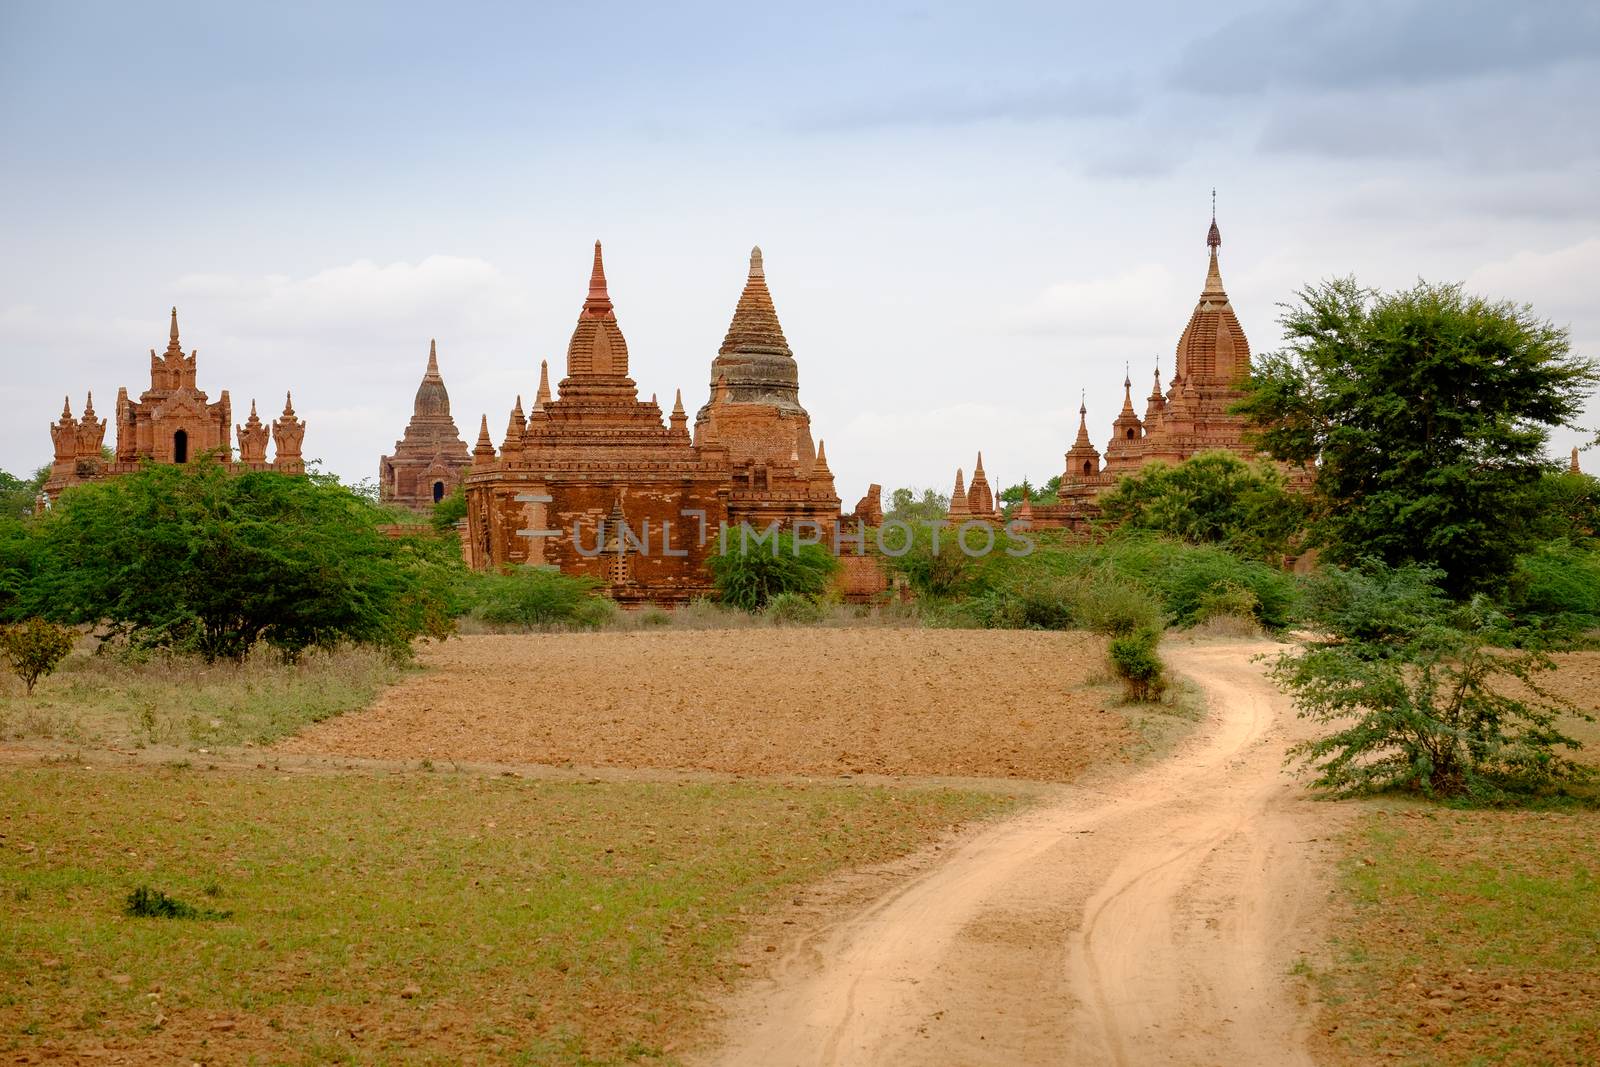 Landscape view of ancient temples in Old Bagan, Myanmar by martinm303